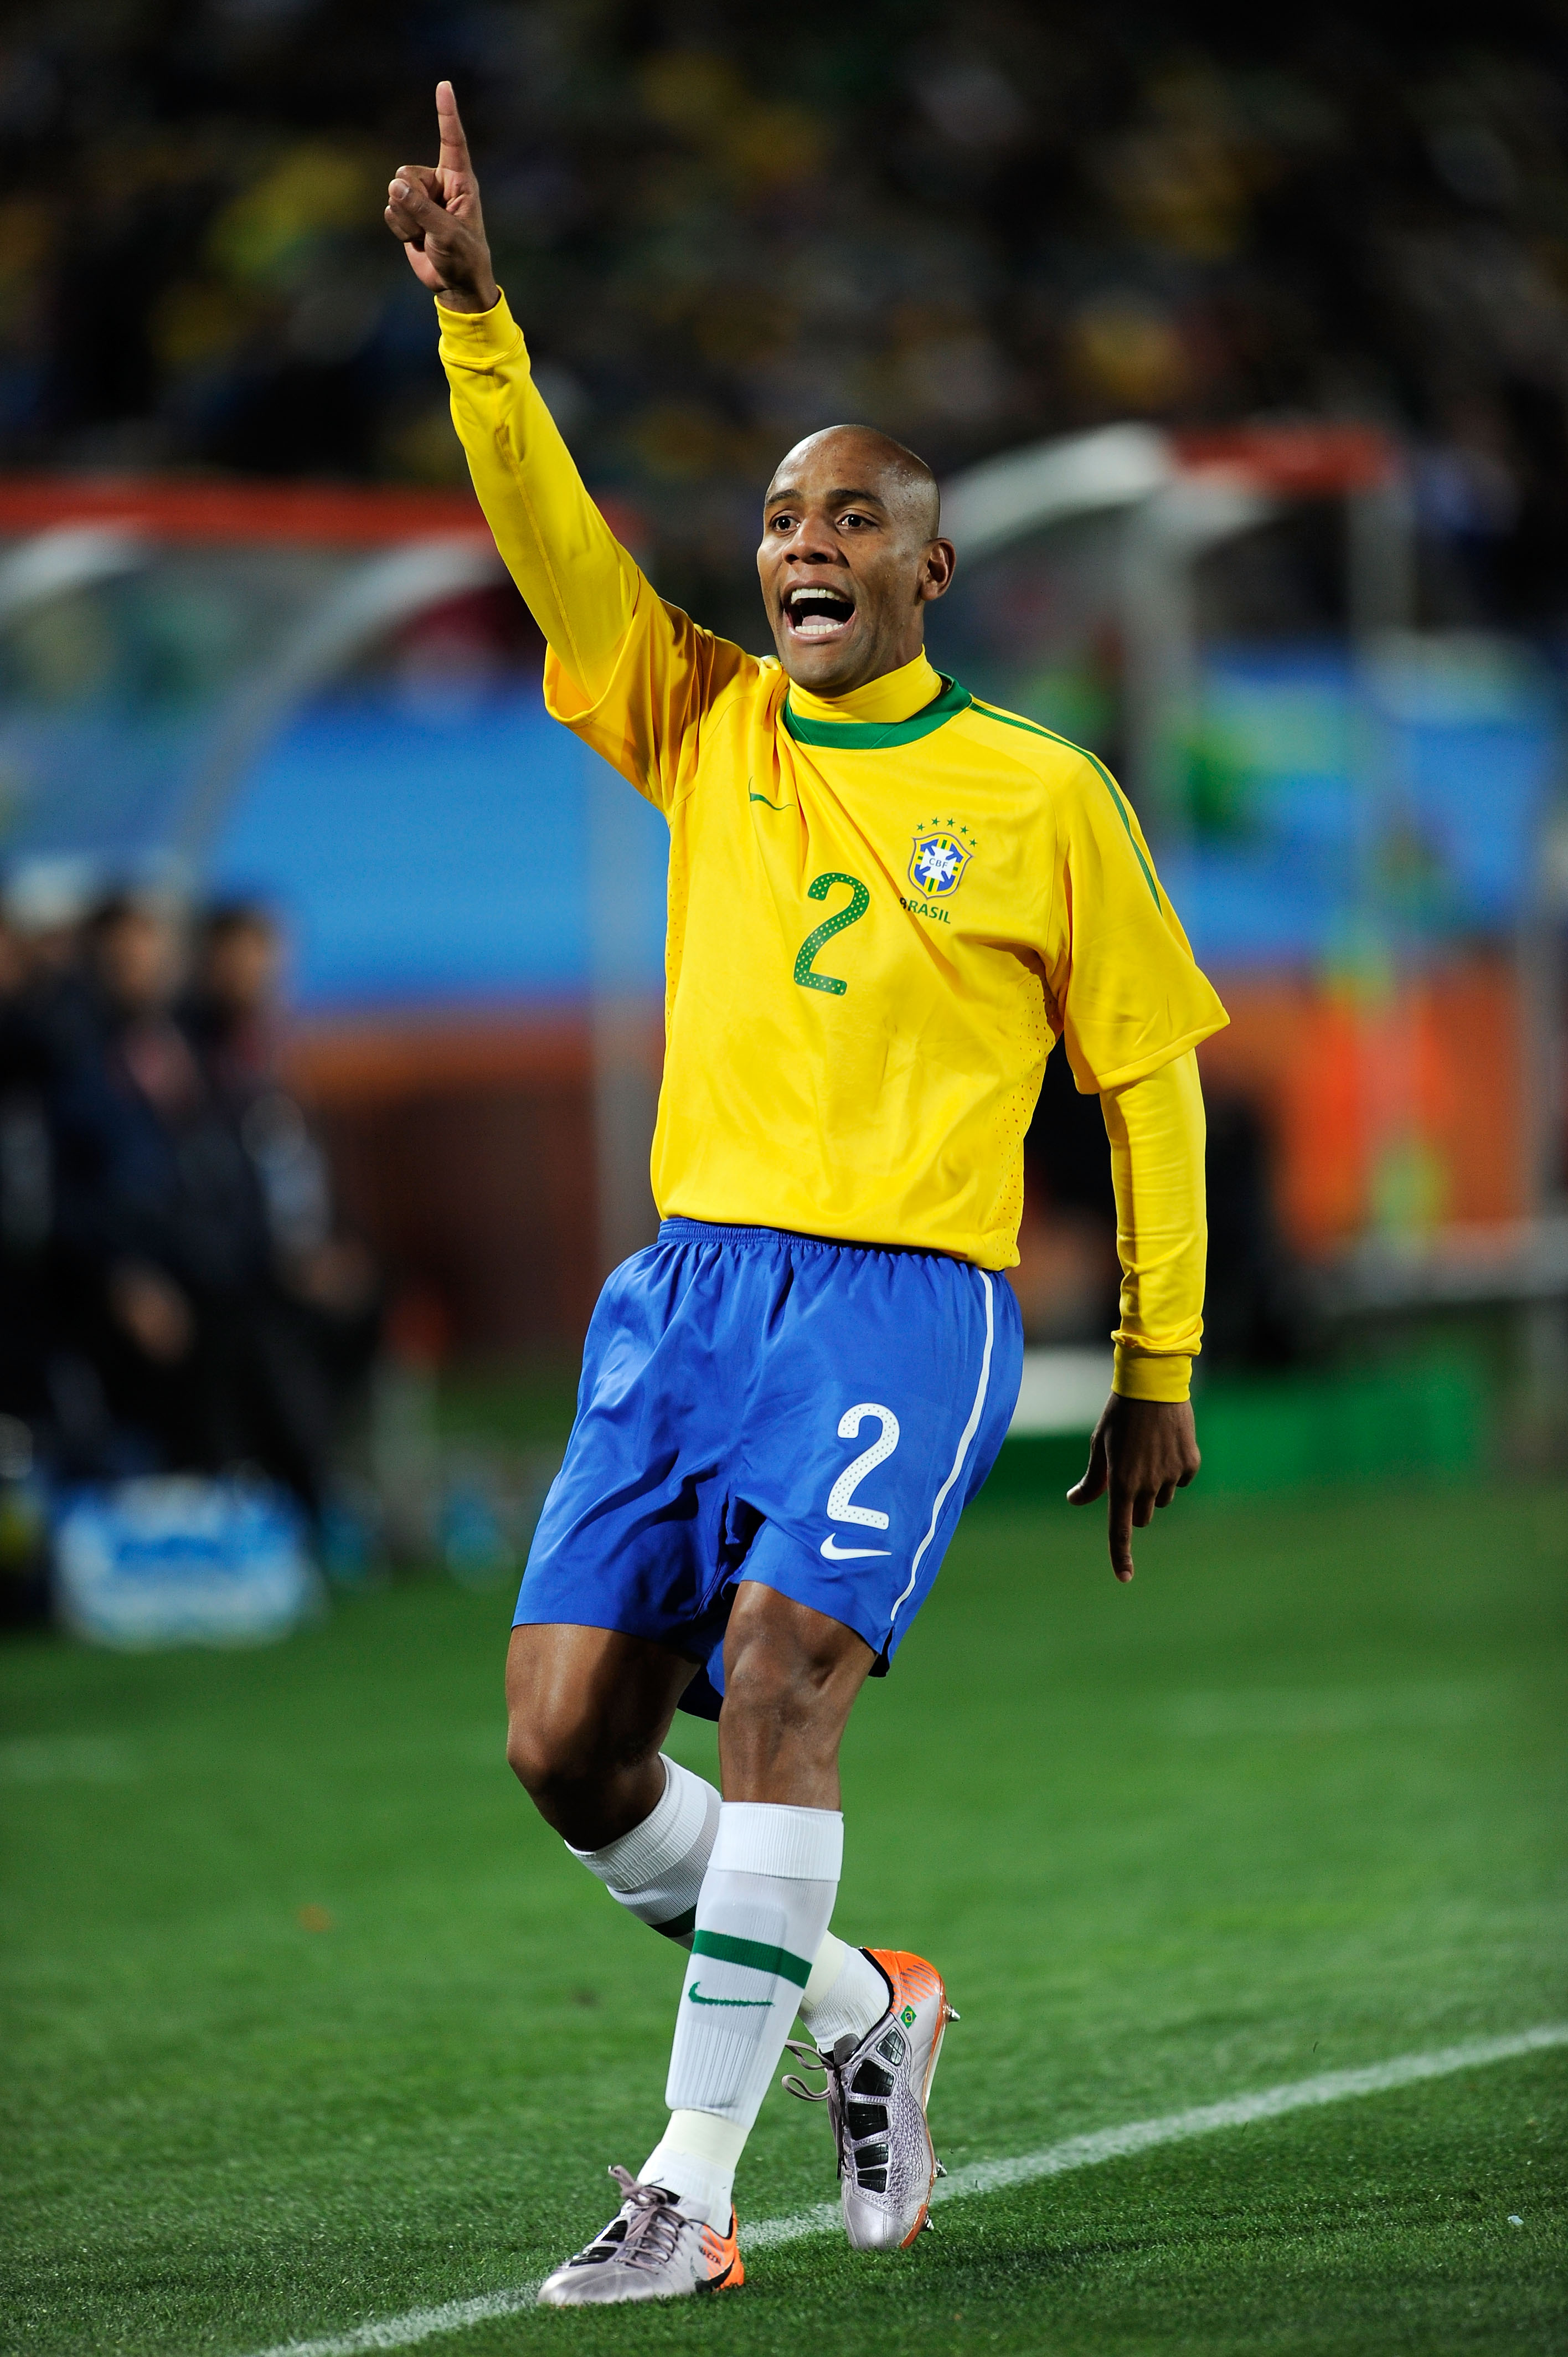 JOHANNESBURG, SOUTH AFRICA - JUNE 15:  Maicon of Brazil gestures during the 2010 FIFA World Cup South Africa Group G match between Brazil and North Korea at Ellis Park Stadium on June 15, 2010 in Johannesburg, South Africa.  (Photo by Stuart Franklin/Gett